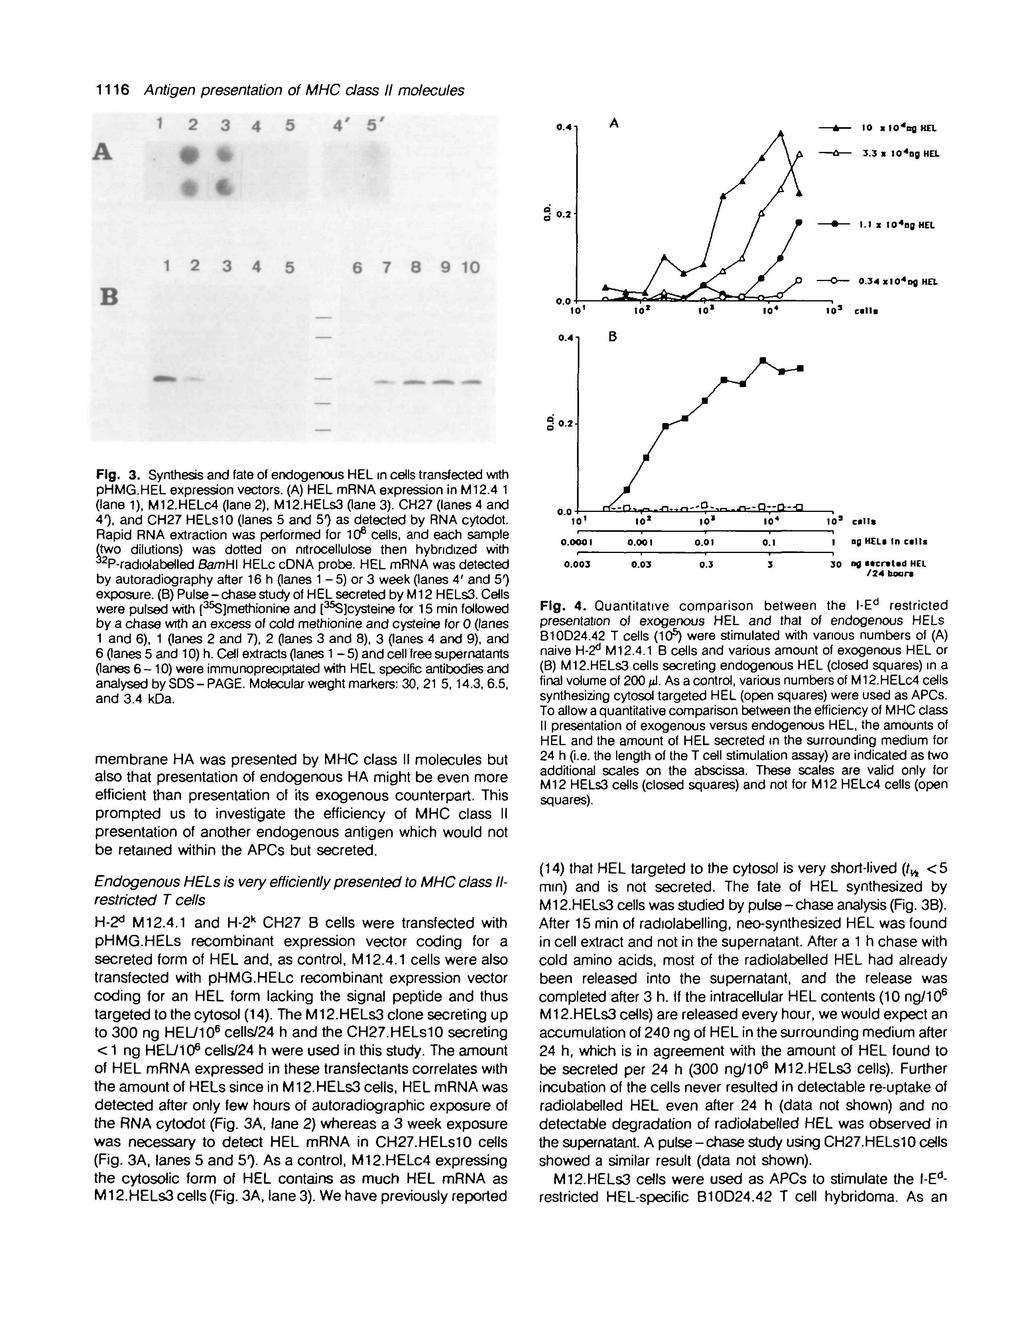 1116 Antigen presentation of MHC class II molecules 12 3 4 5 4 5 10 l l O ' l i g HEL 3.3 > 10 4 ng HEL 1.1 i IO 4 ng HEL 12 3 4 5 6 7 8 9 10 Fig. 3. Synthesis and fate of endogenous HEL in cells transfected with phmg.